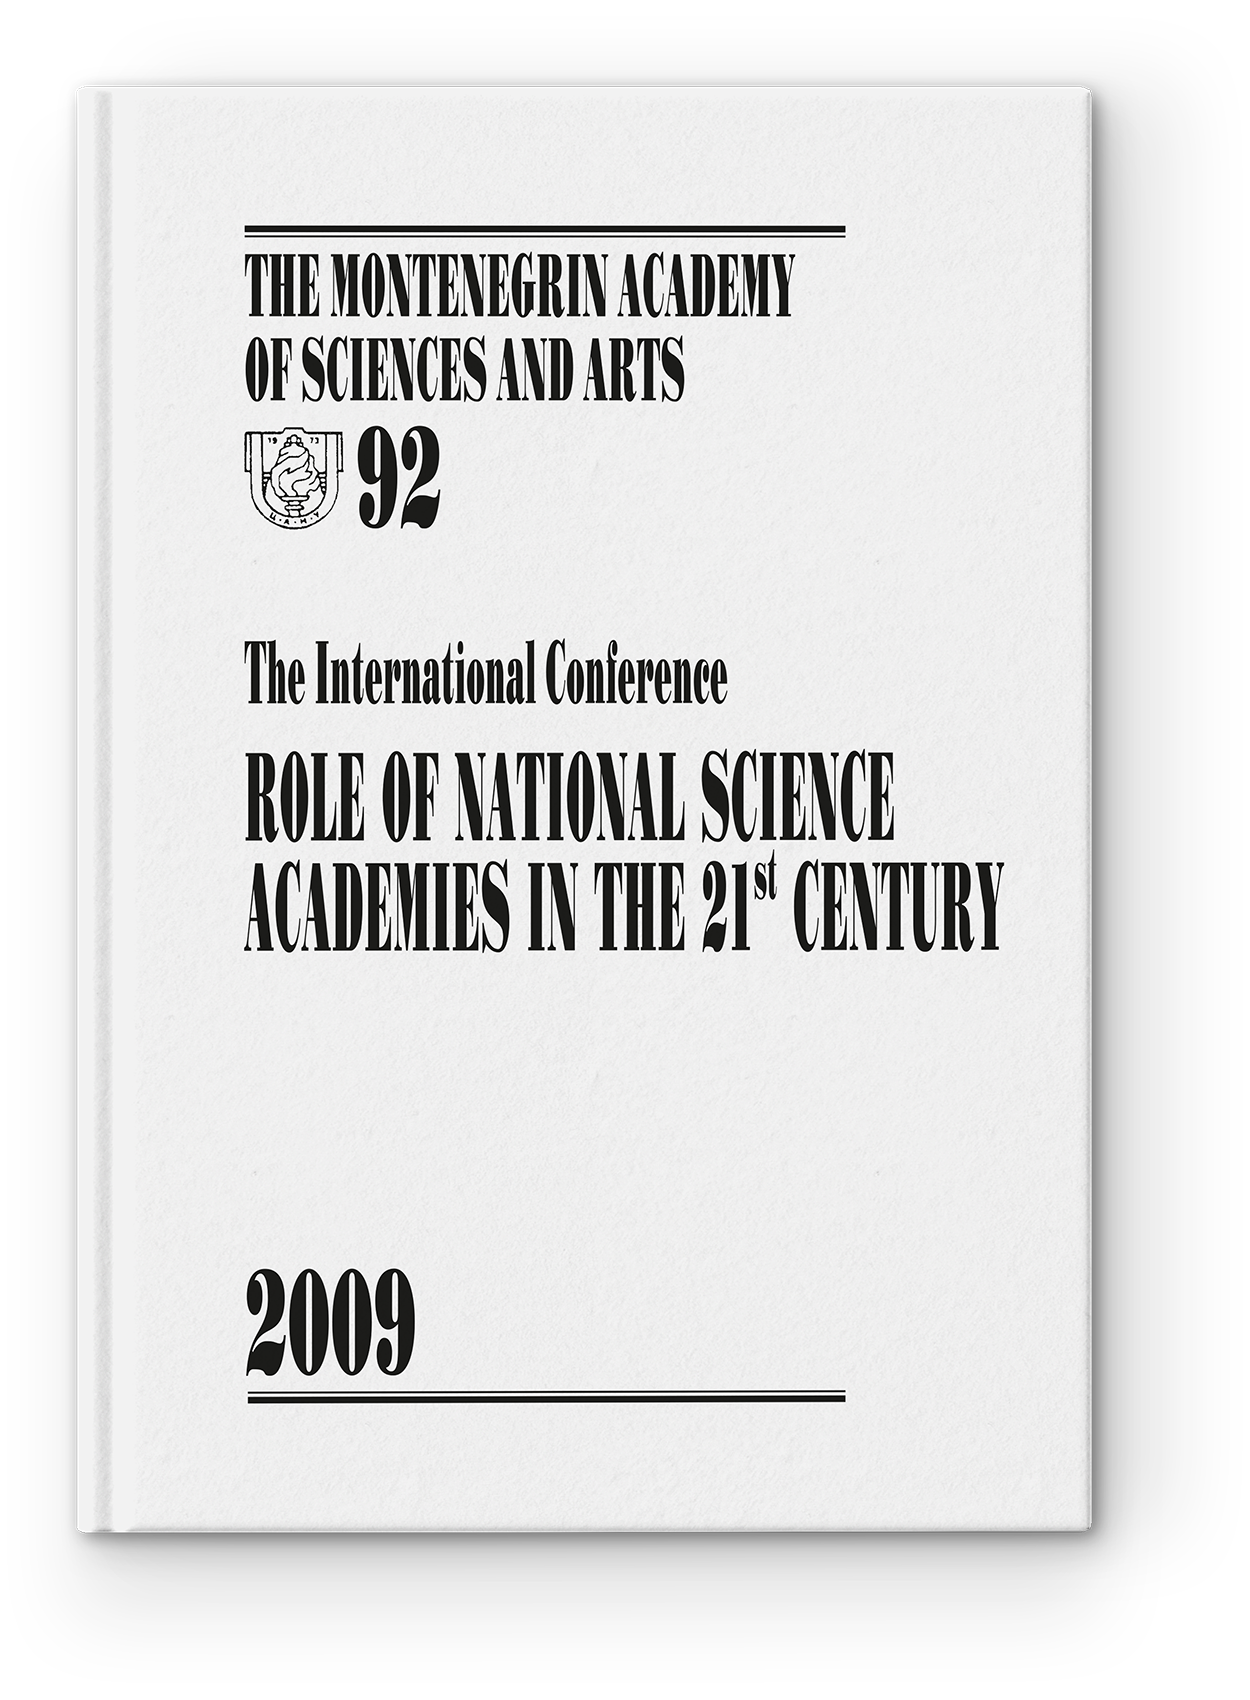 Role of National Science Academies in the 21st Century